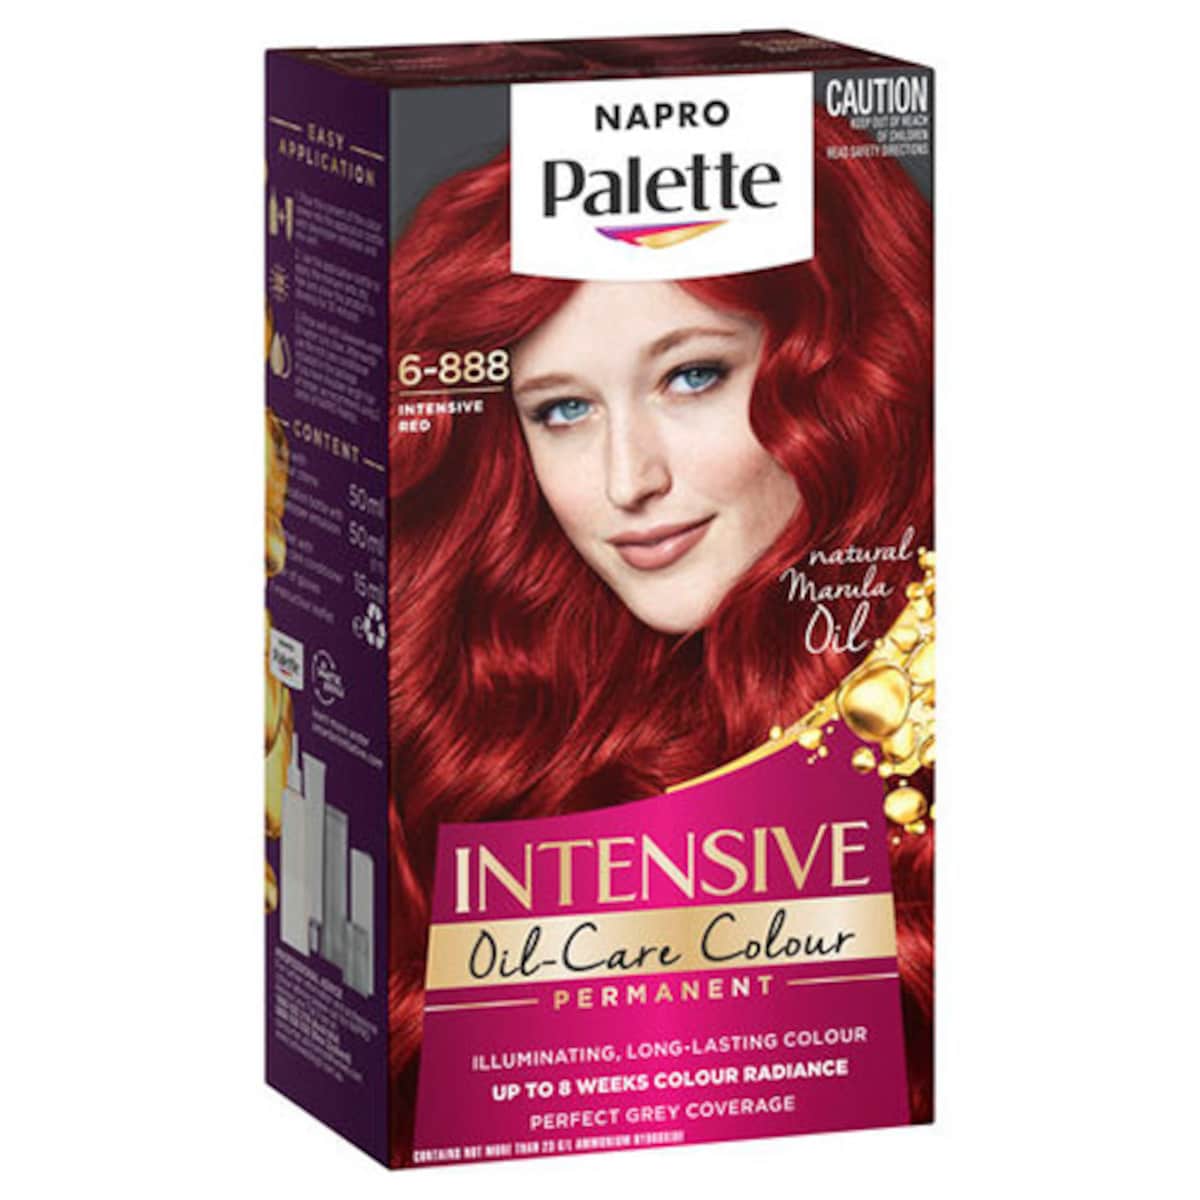 Napro Palette Hair Colour 6.888 Intensive Red by Schwarzkopf